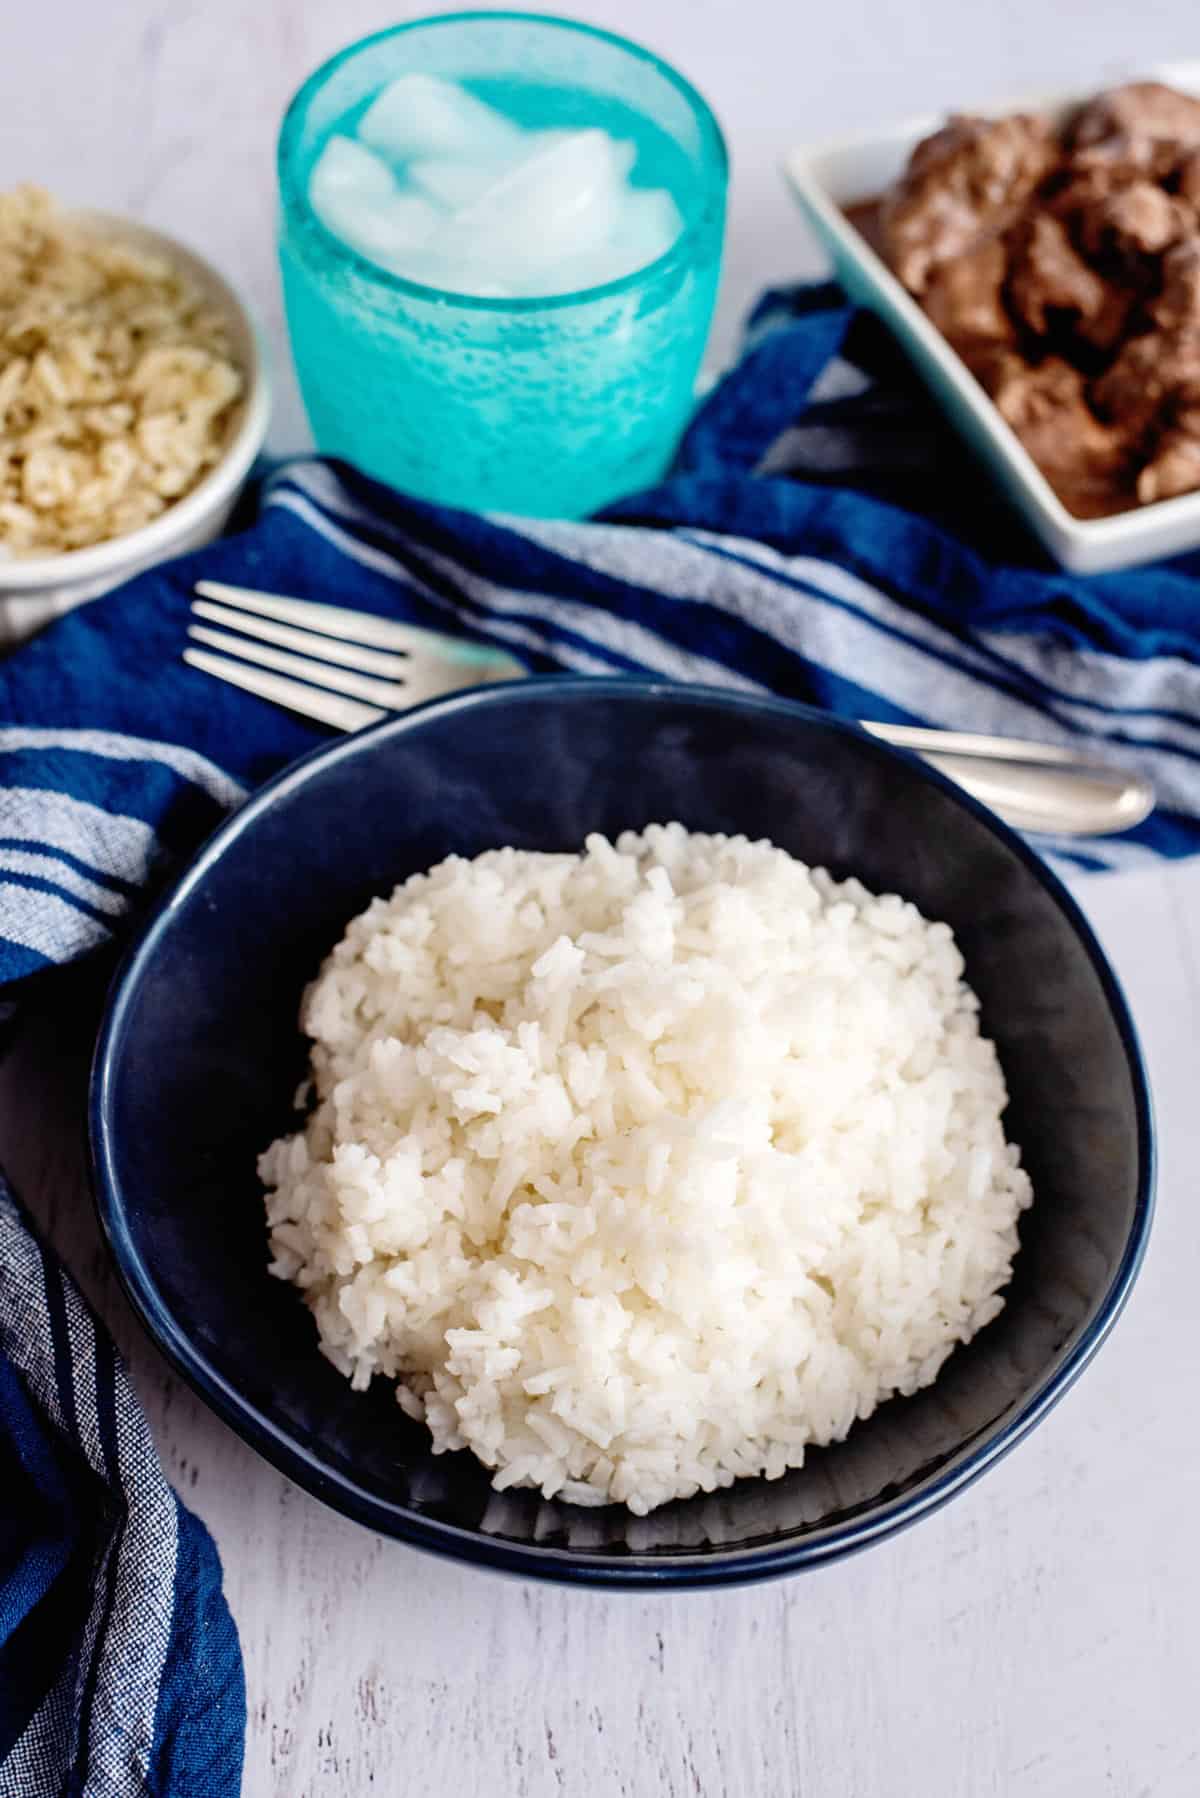 prepare rice according to directions